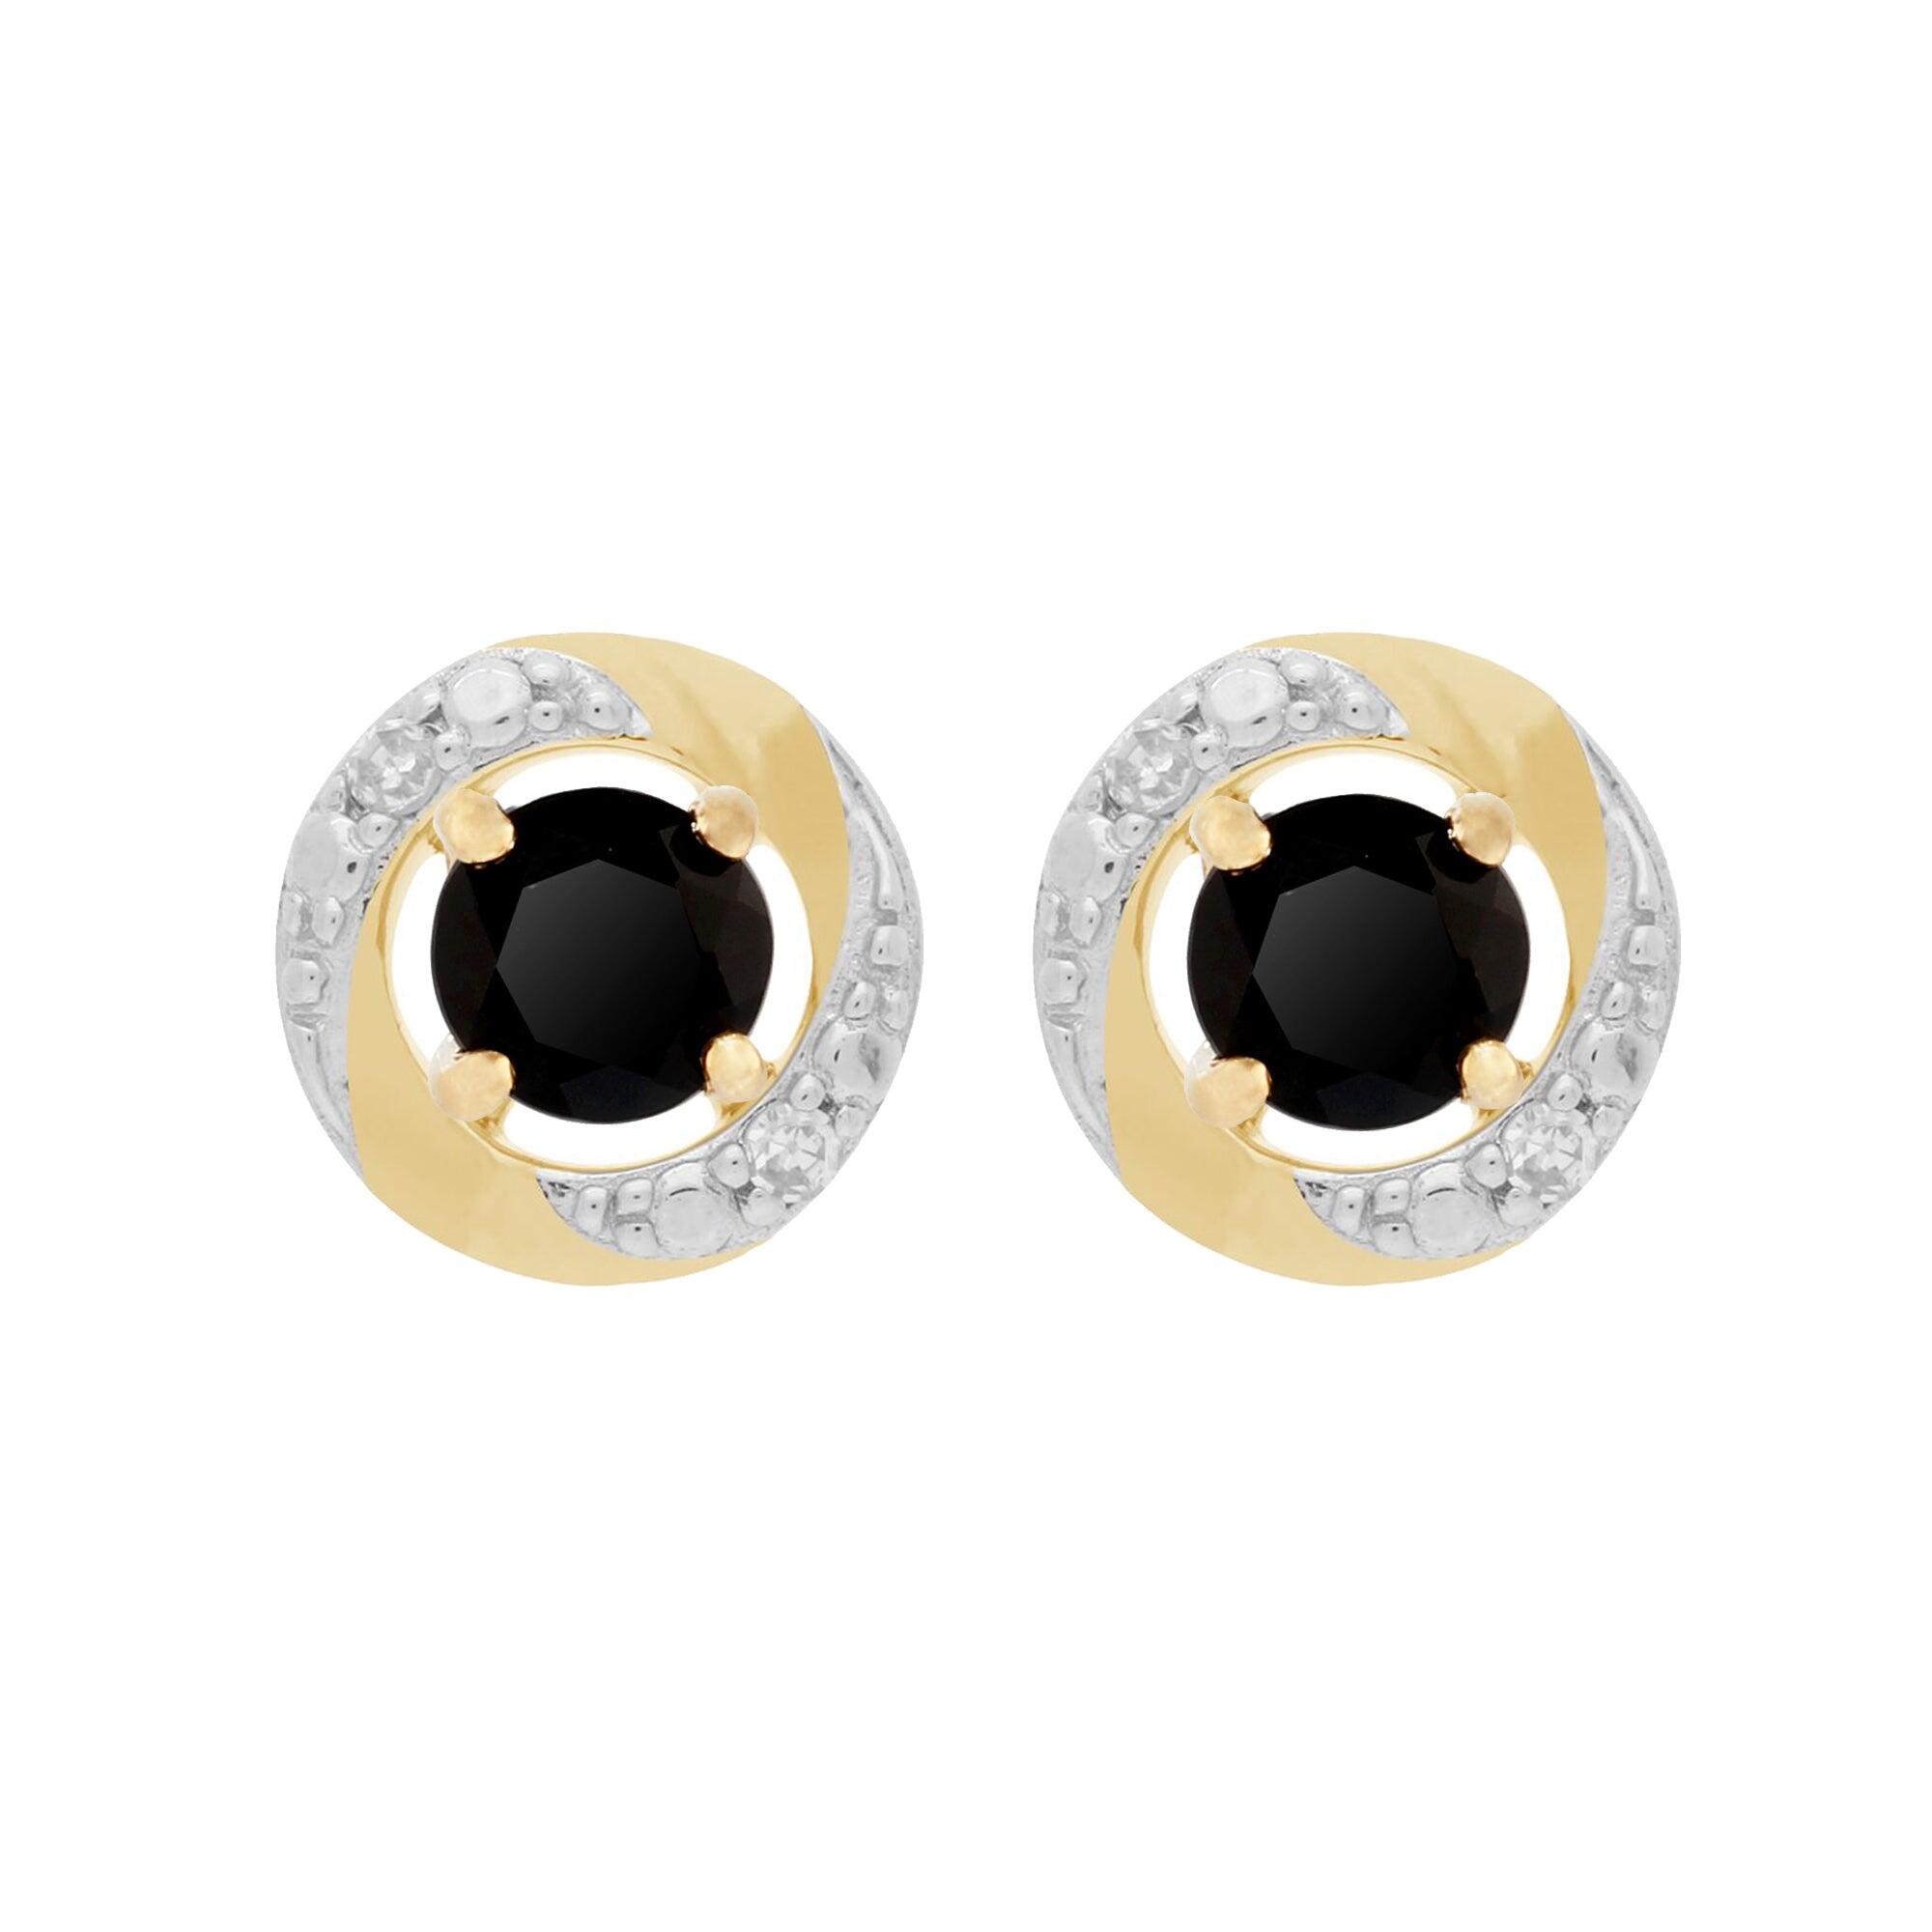 Classic Round Black Onyx Stud Earrings with Detachable Diamond Halo Ear Jacket in 9ct Yellow Gold